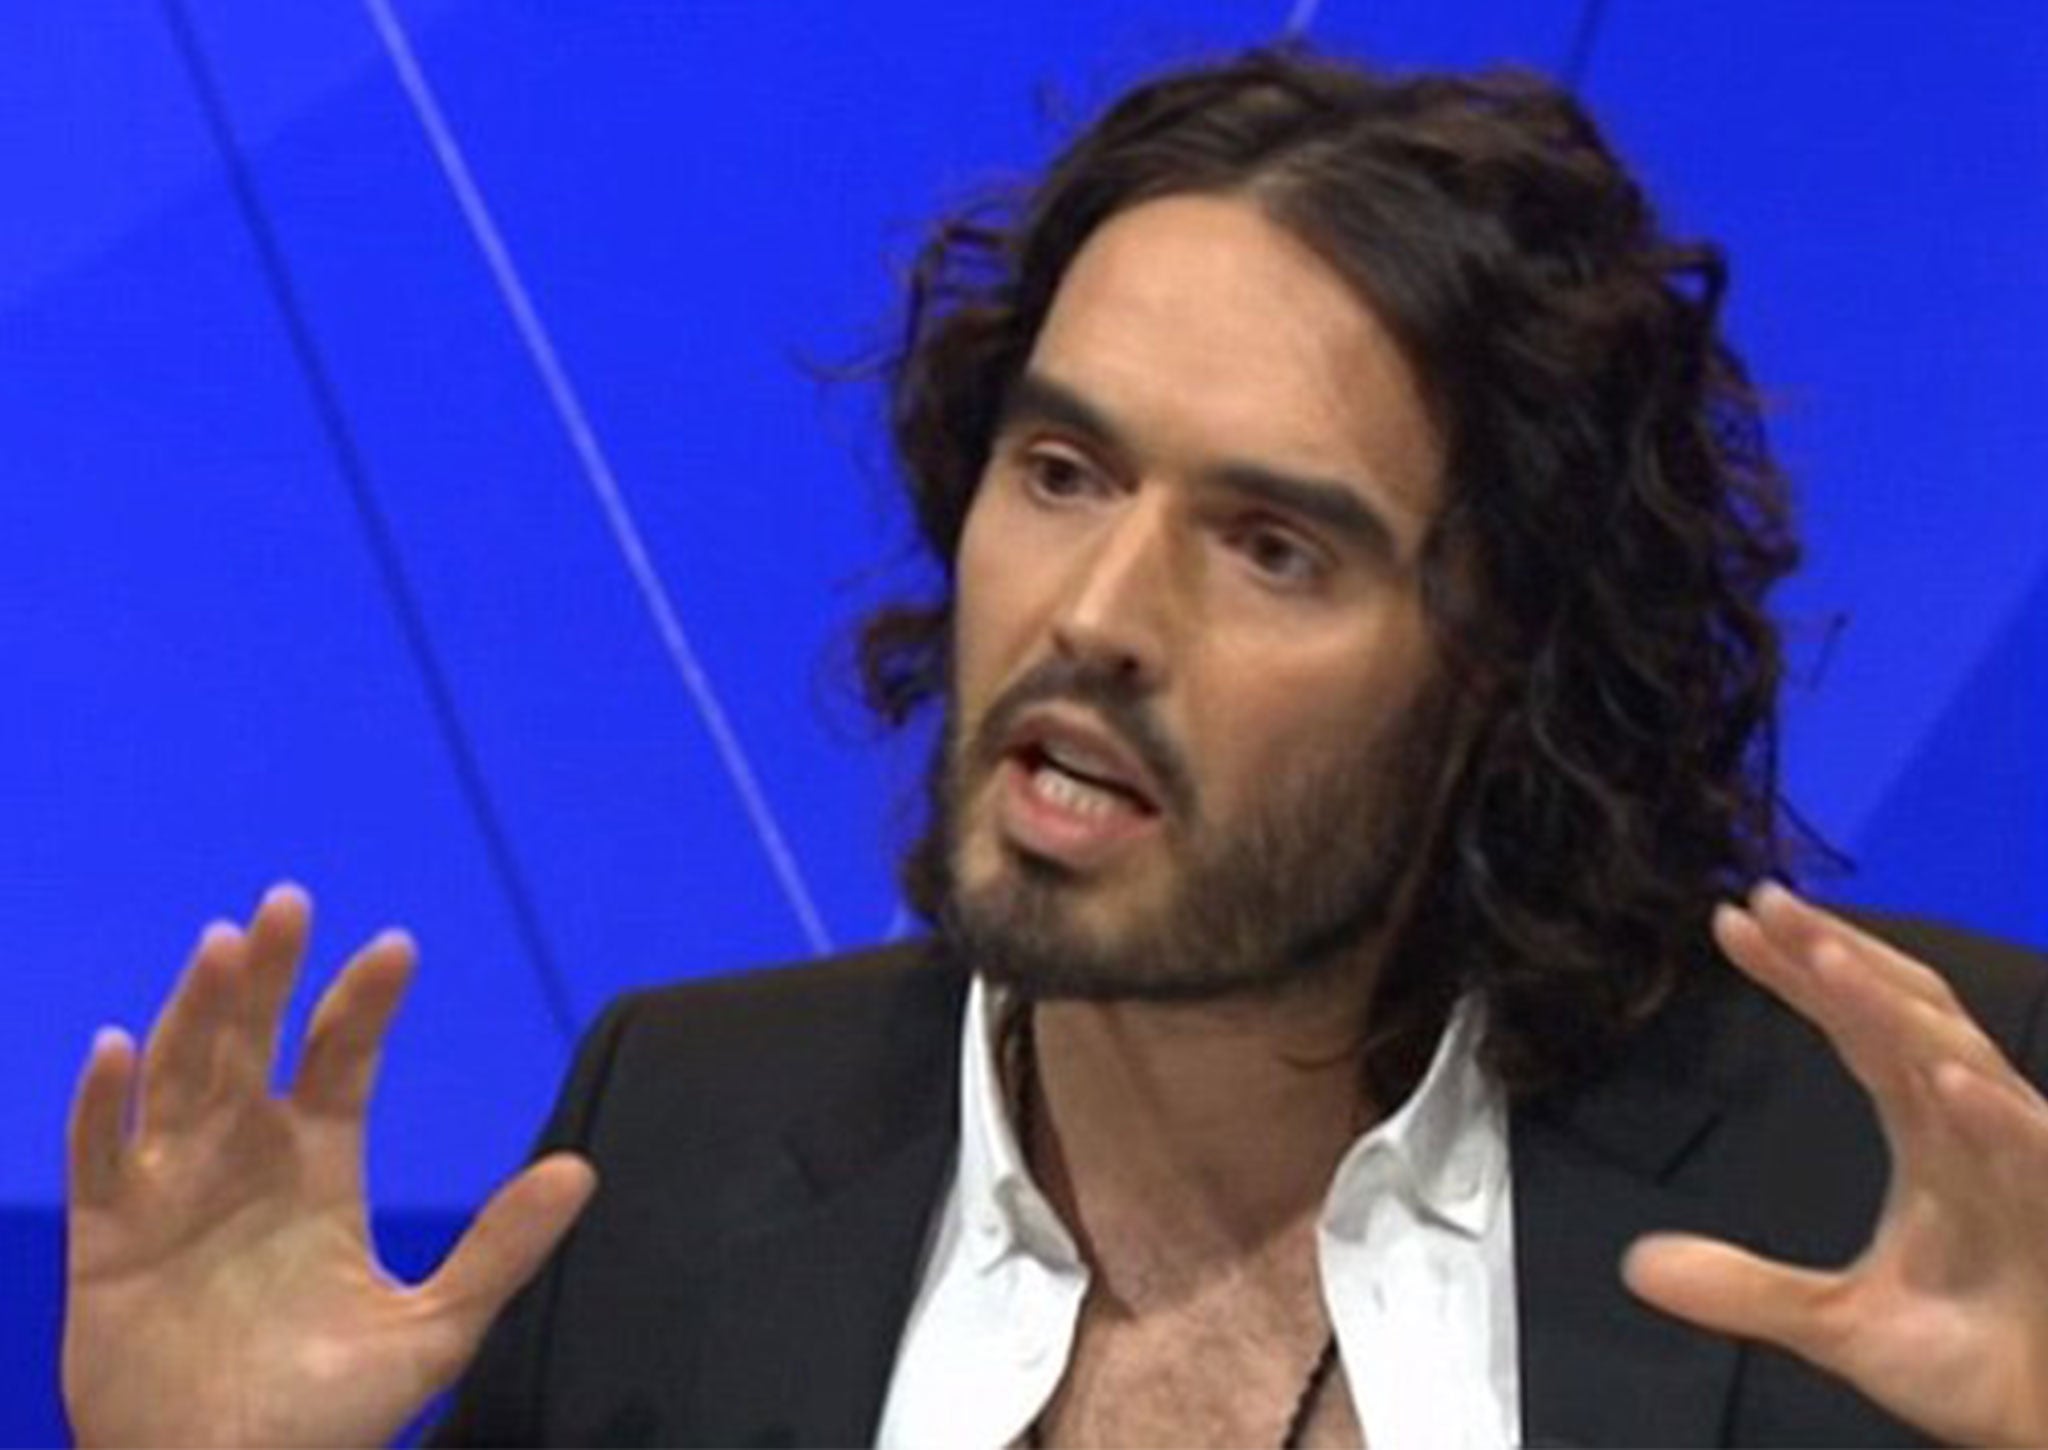 “Why vote? We know it’s not going to make any difference,” ranted Russell Brand